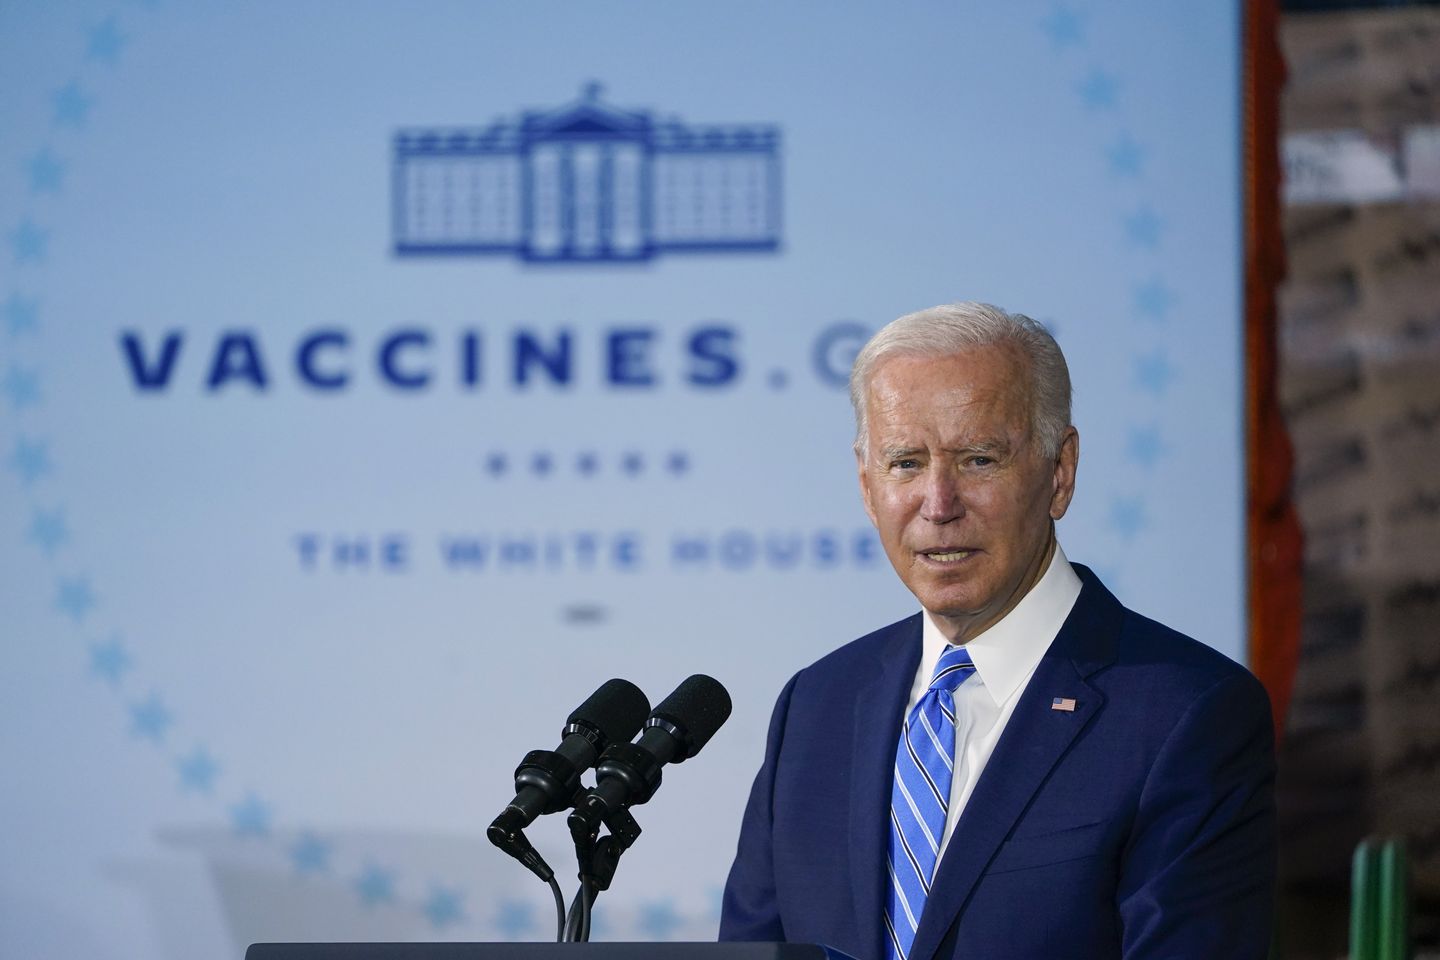 More Americans have died of COVID under Biden than Trump: Johns Hopkins